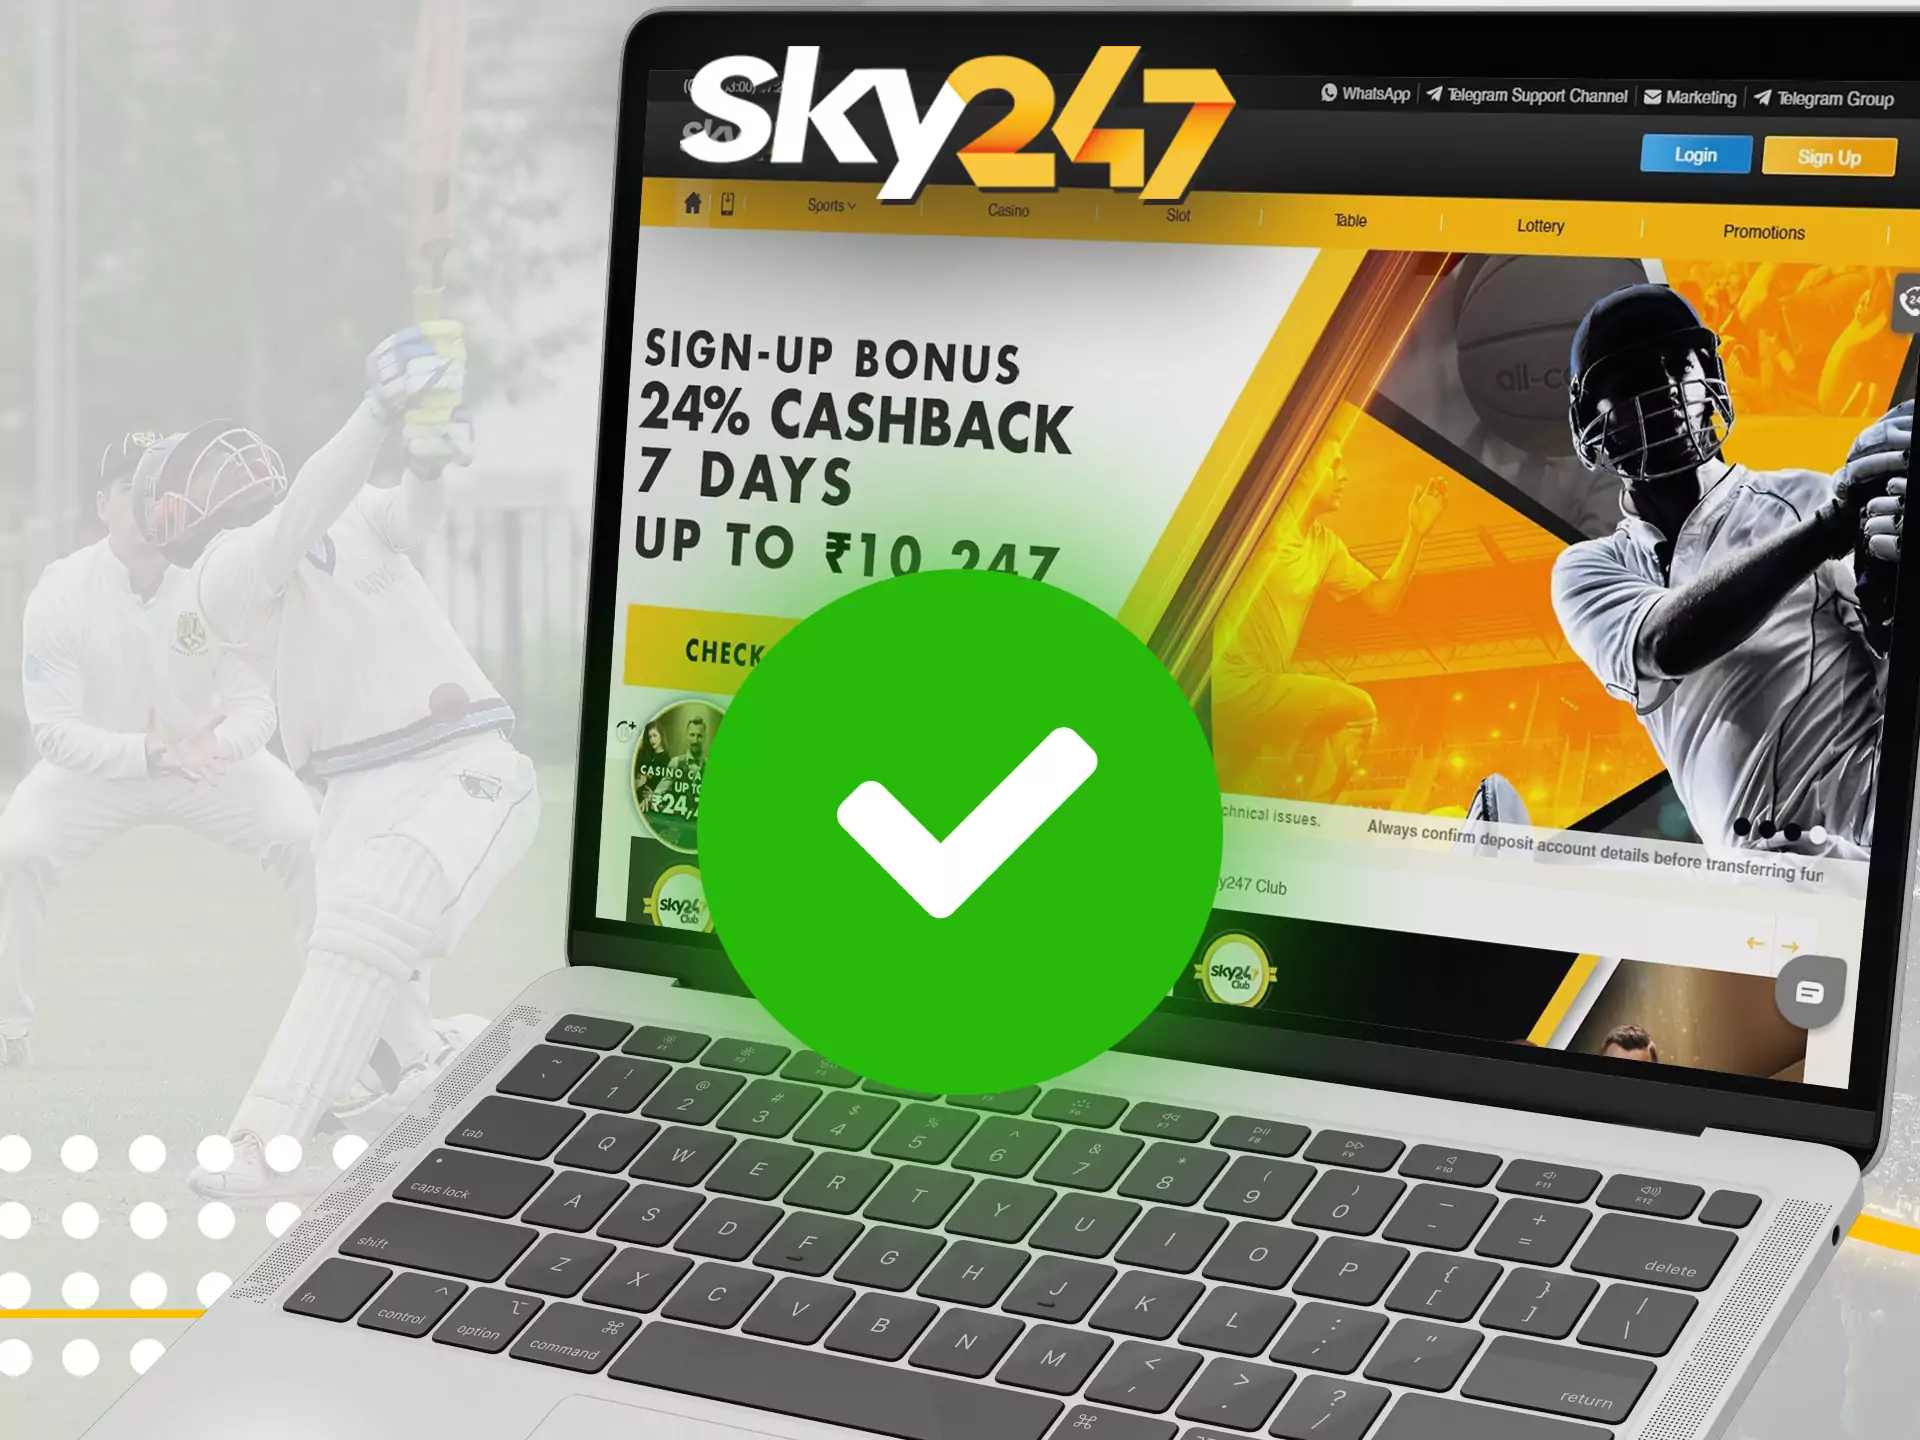 To bet on the Sky247 website, you should verify your account.